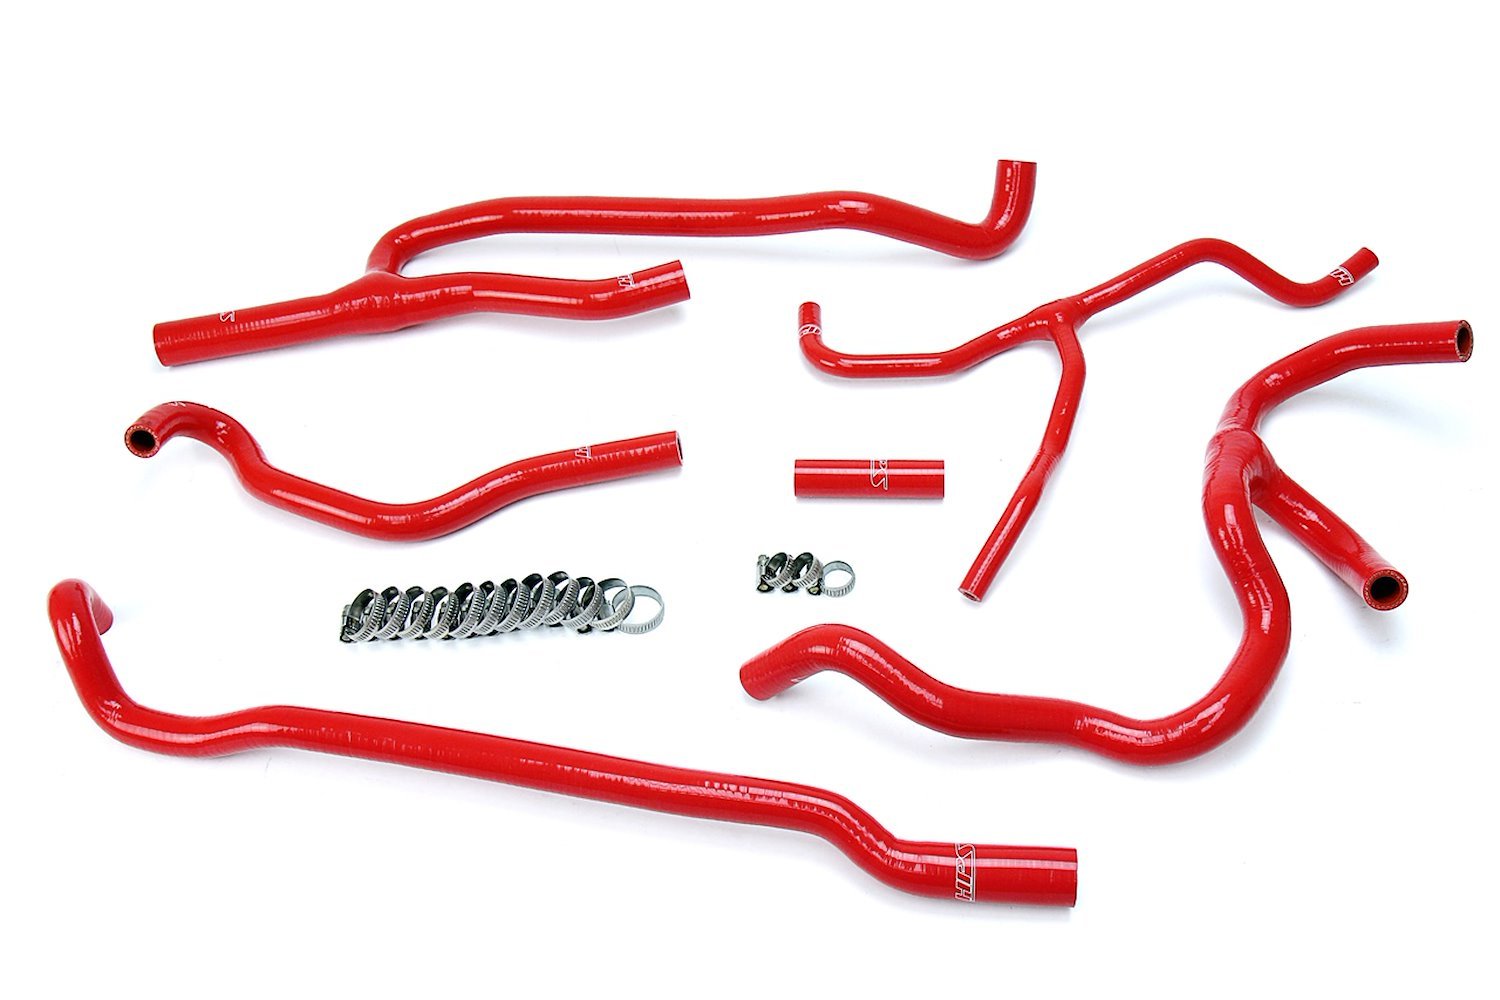 57-1660-RED Heater Hose Kit, High-Temp 3-Ply Reinforced Silicone, Replace OEM Rubber Heater Coolant Hoses